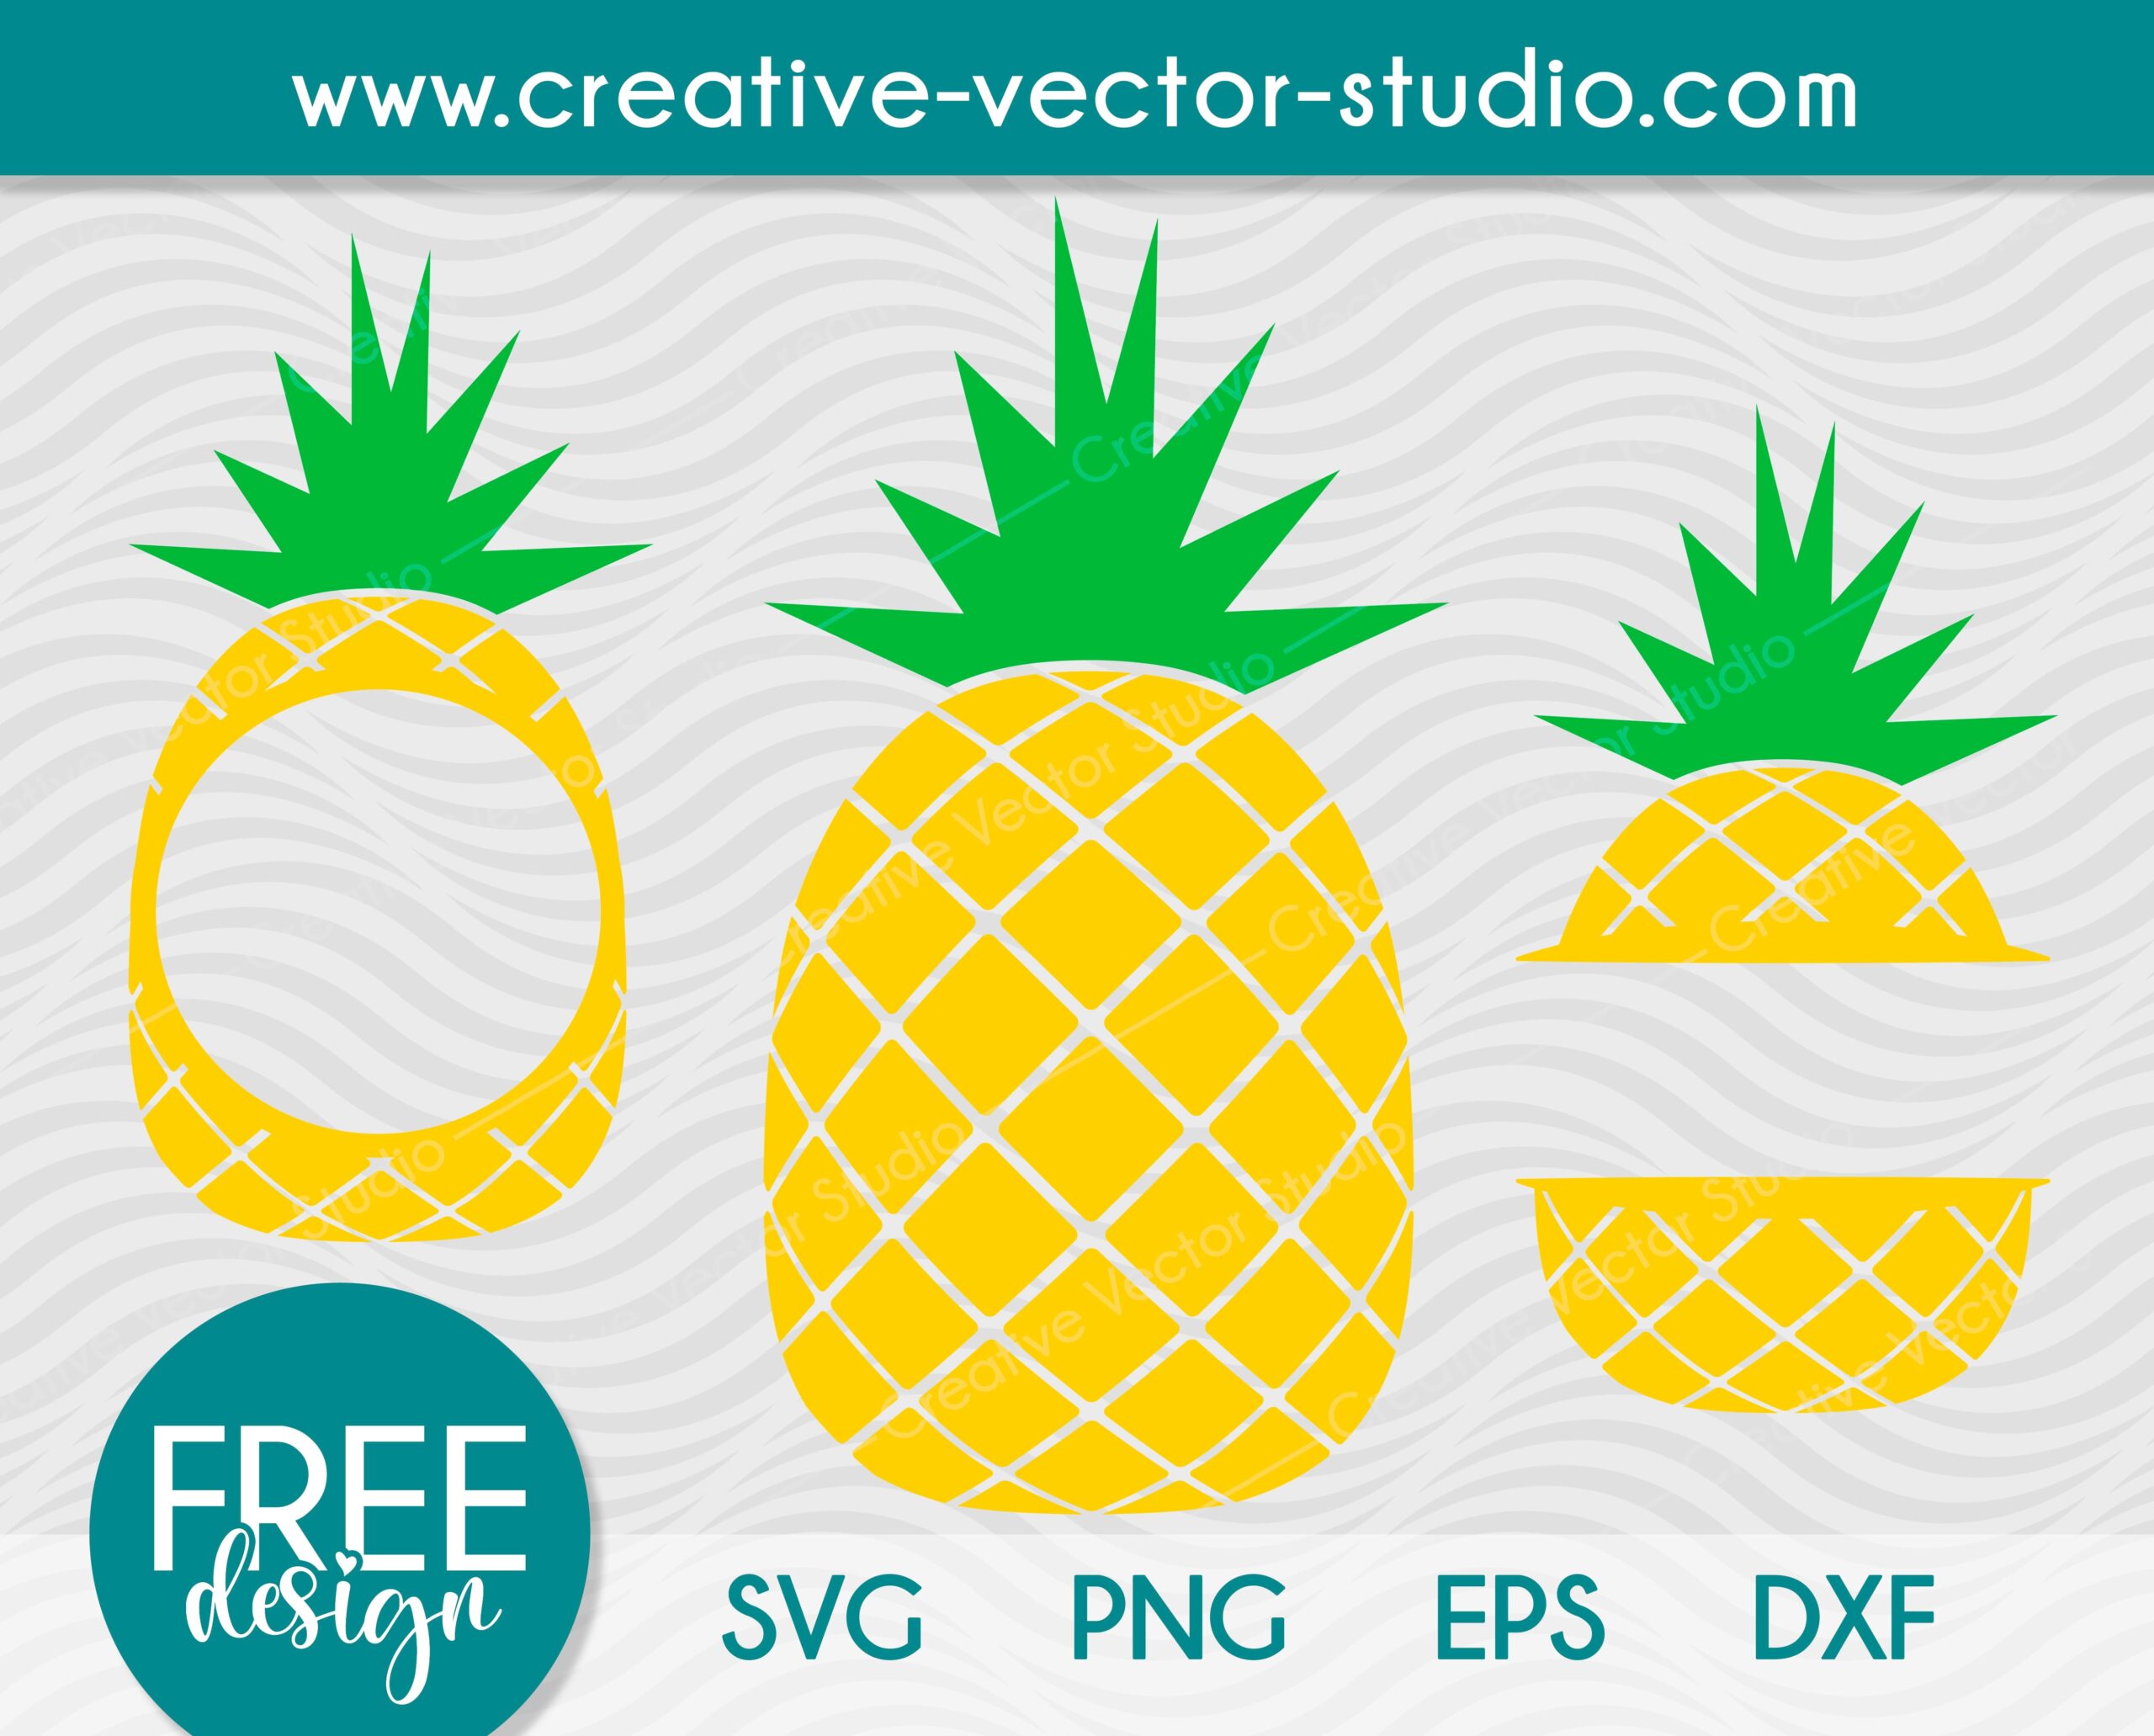 Pineapple DXF File Pineapple PNG File Vector Art Commercial /& Personal Use- png file,dxf file for Cricut,dxf file for Silhouette,vinyl